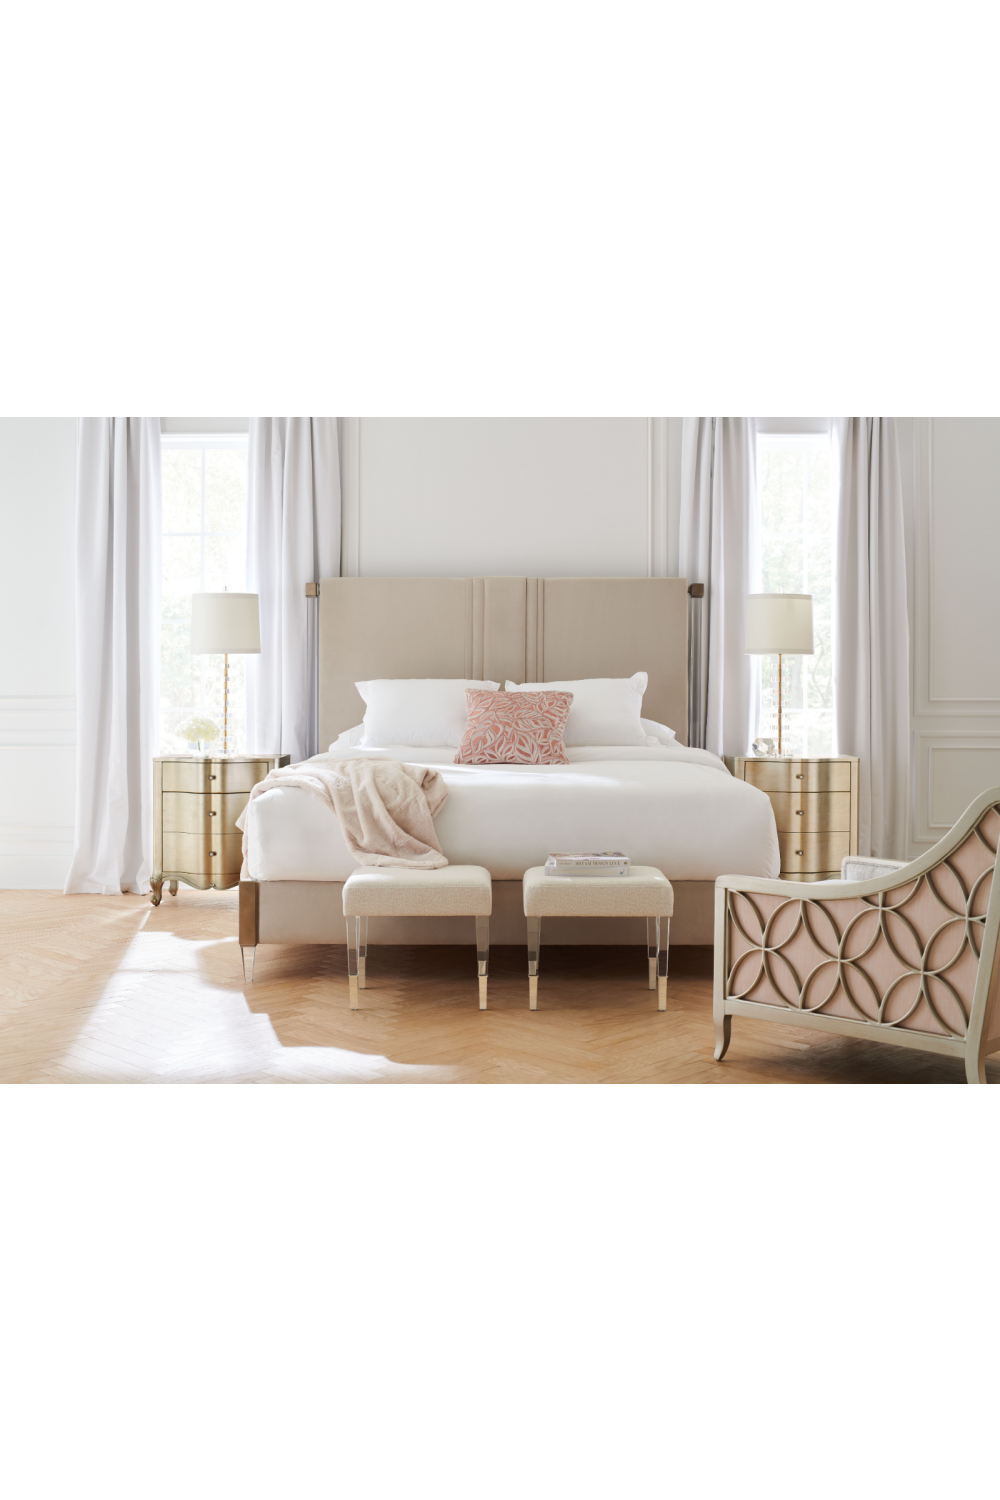 Cream Modern King Bed | Caracole Light Up Your Life Oroa.com